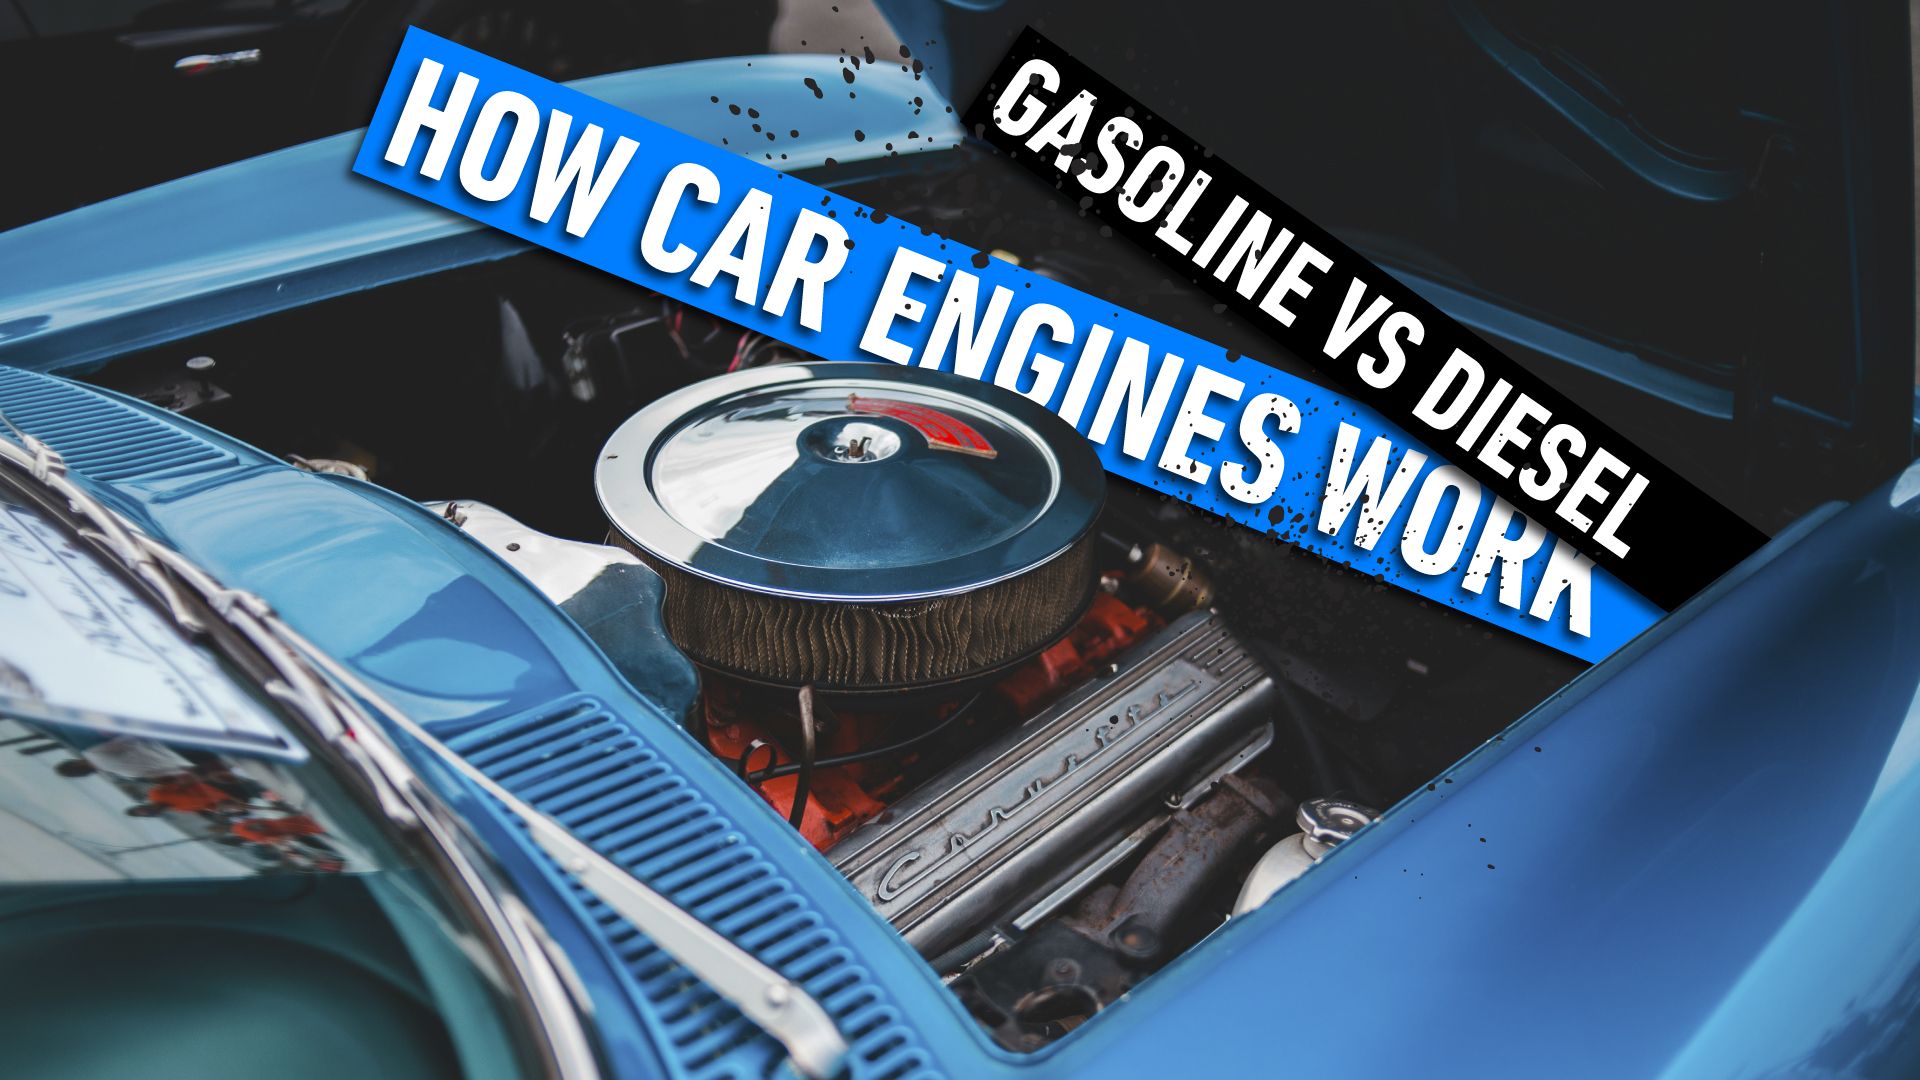 How-Car-Engines-Work